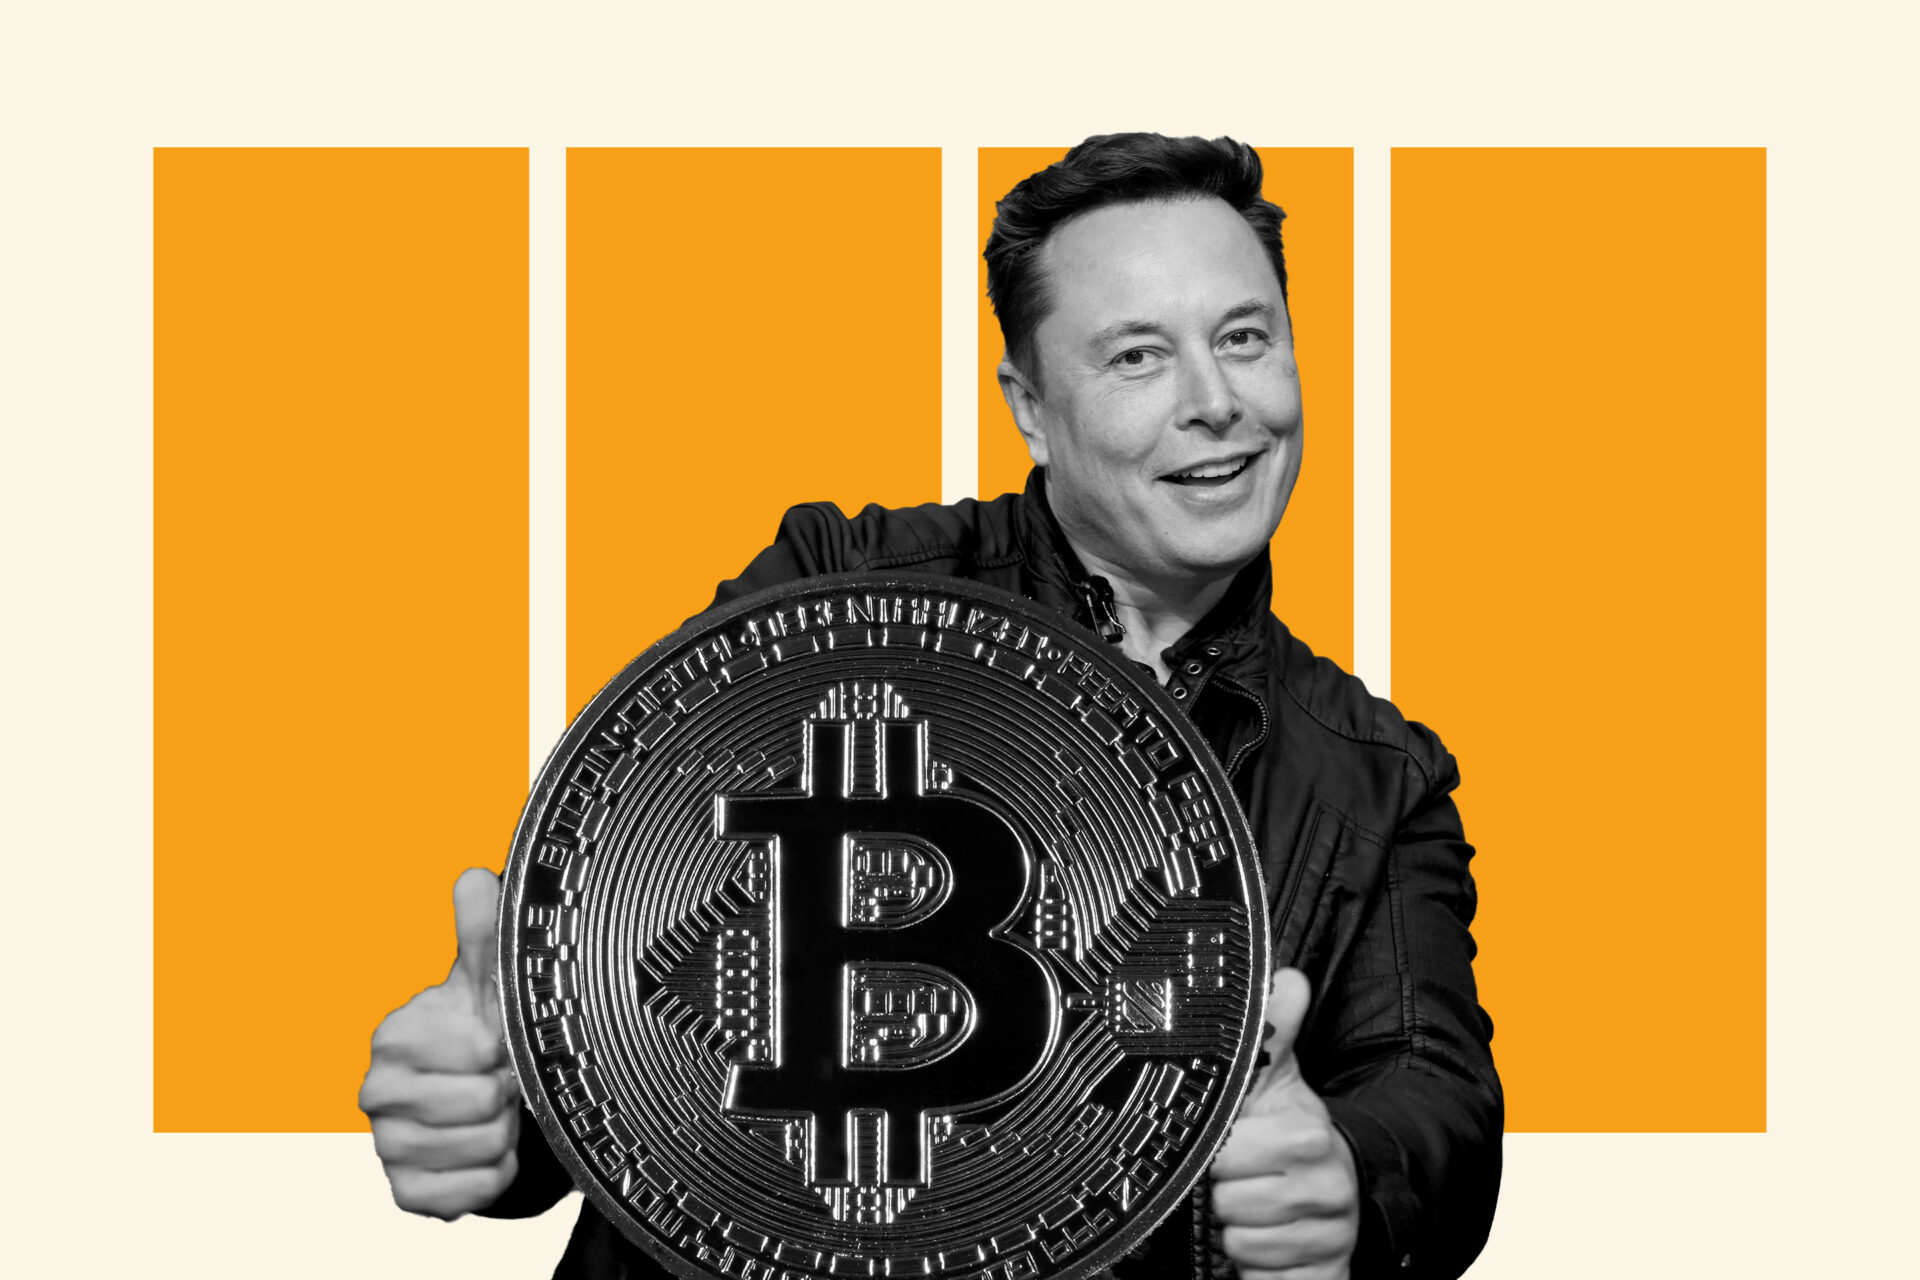 elon musks crypto currency